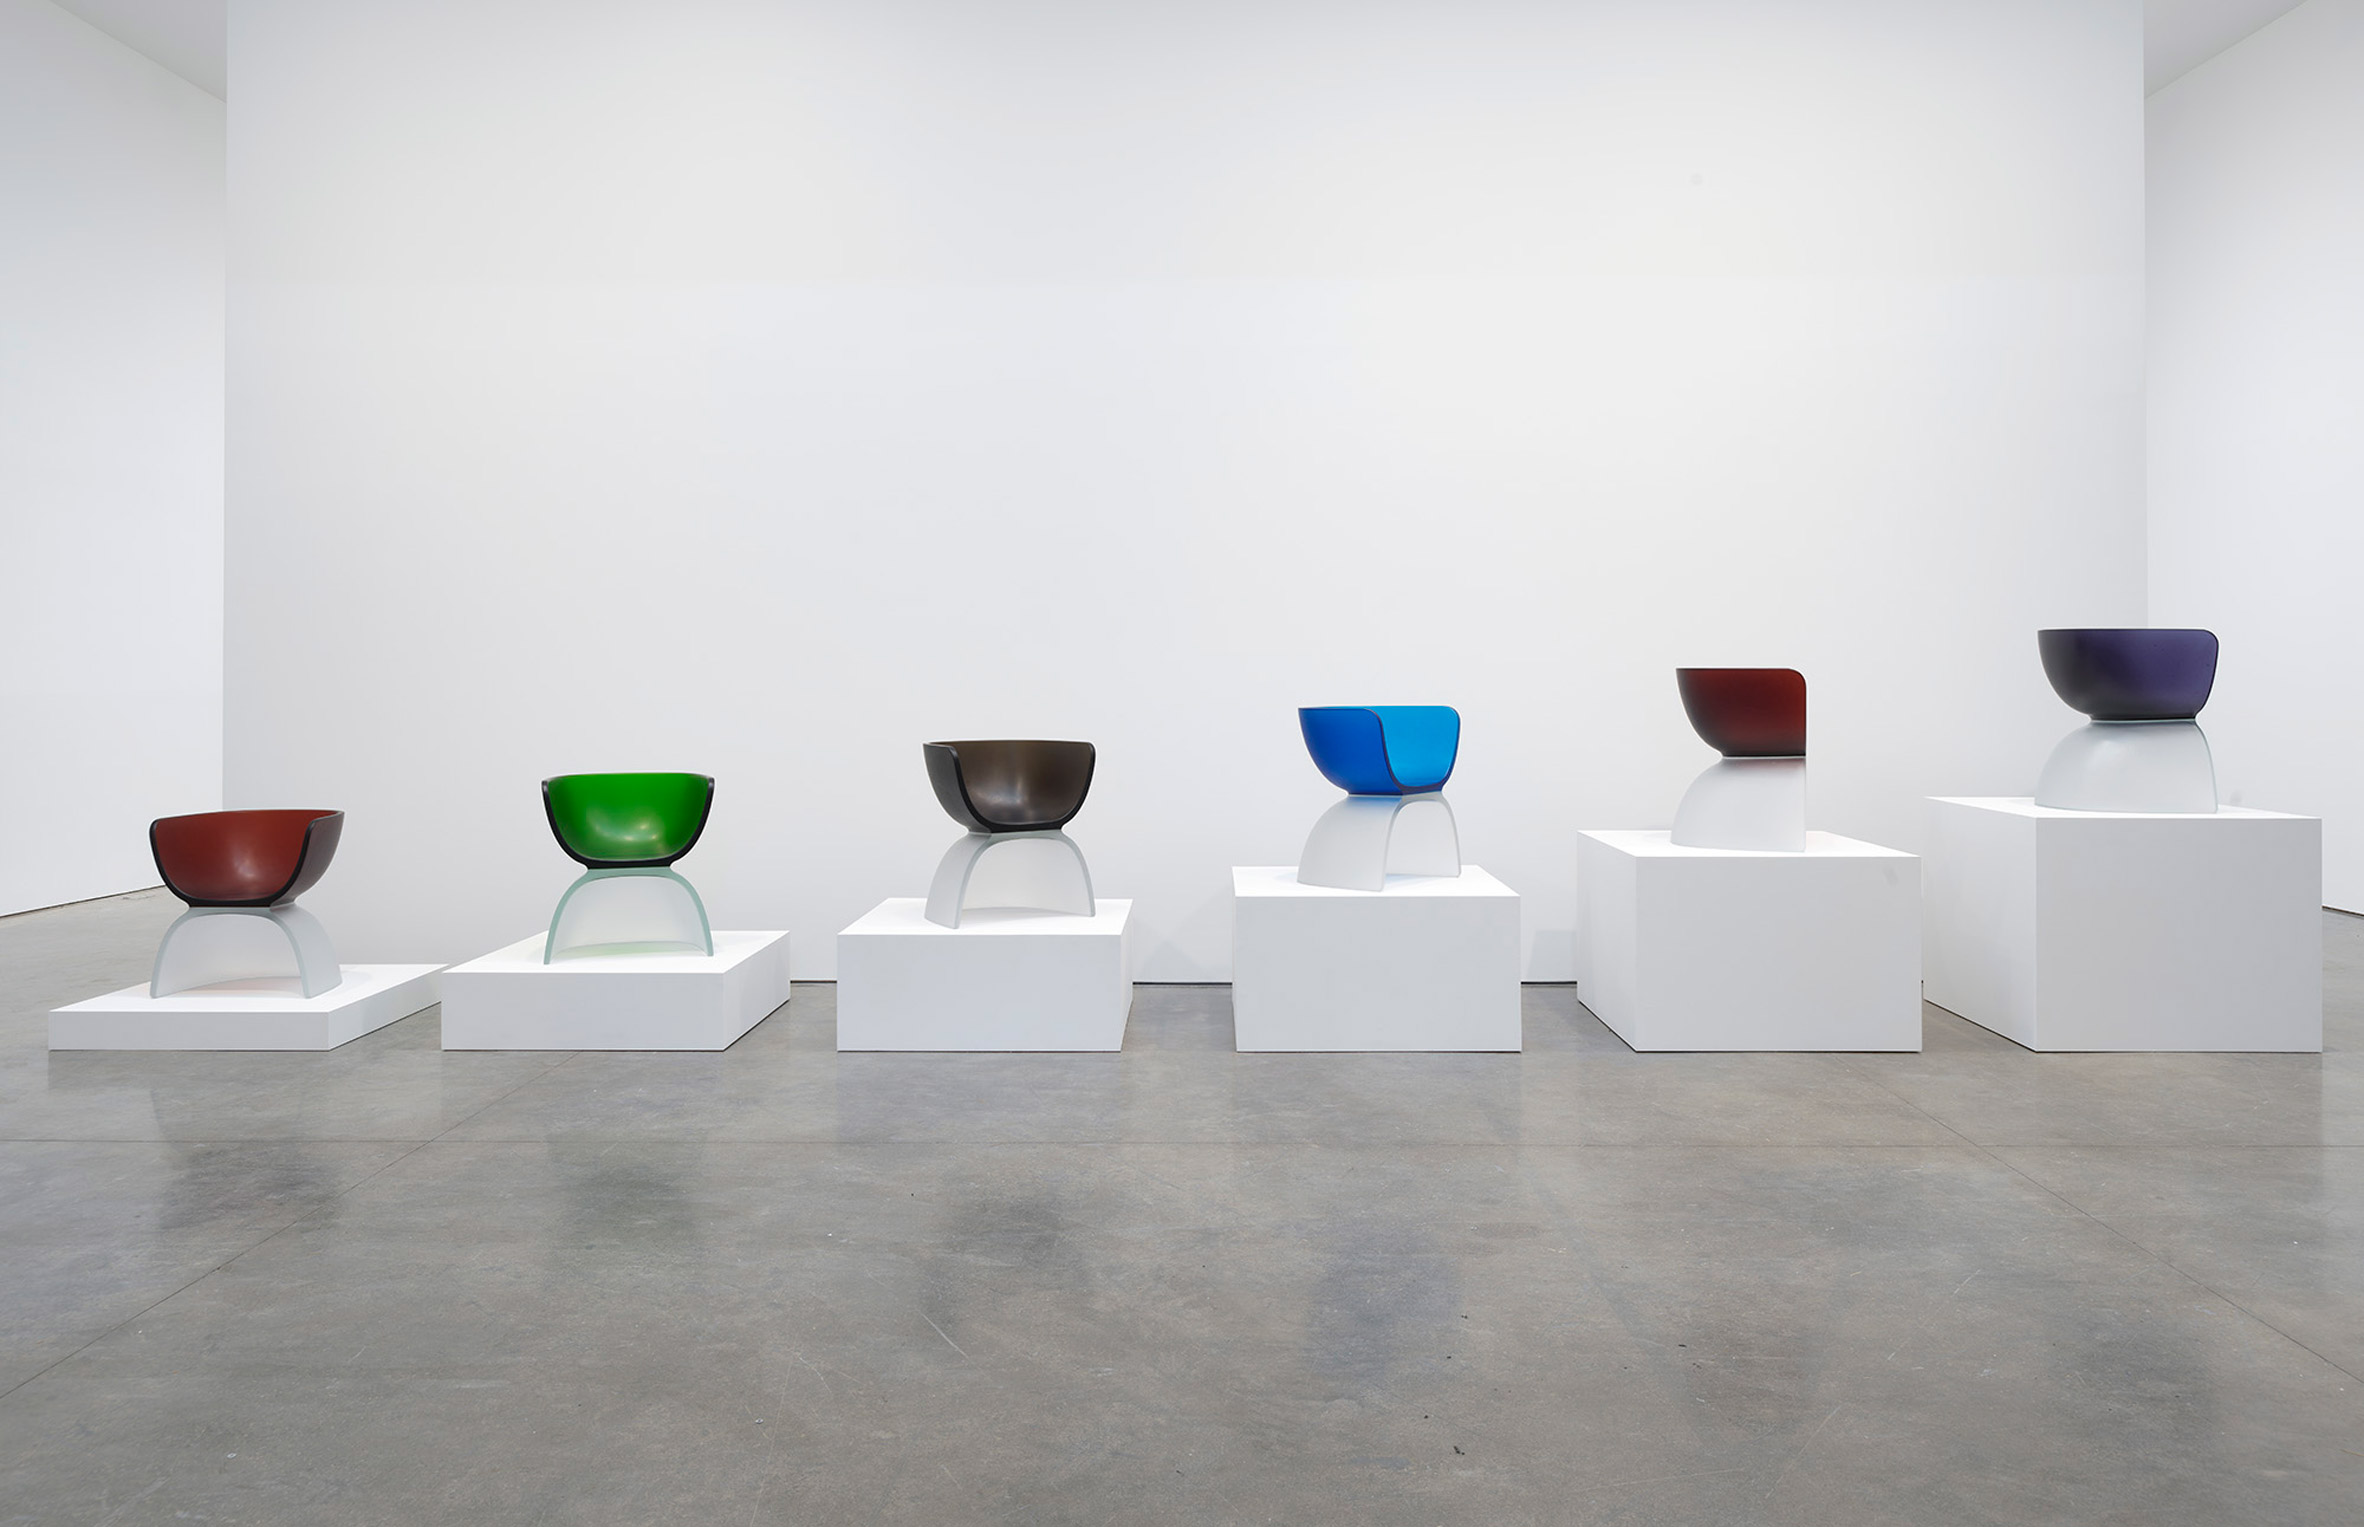 Marc Newson on his solo show at Gagosian New York City